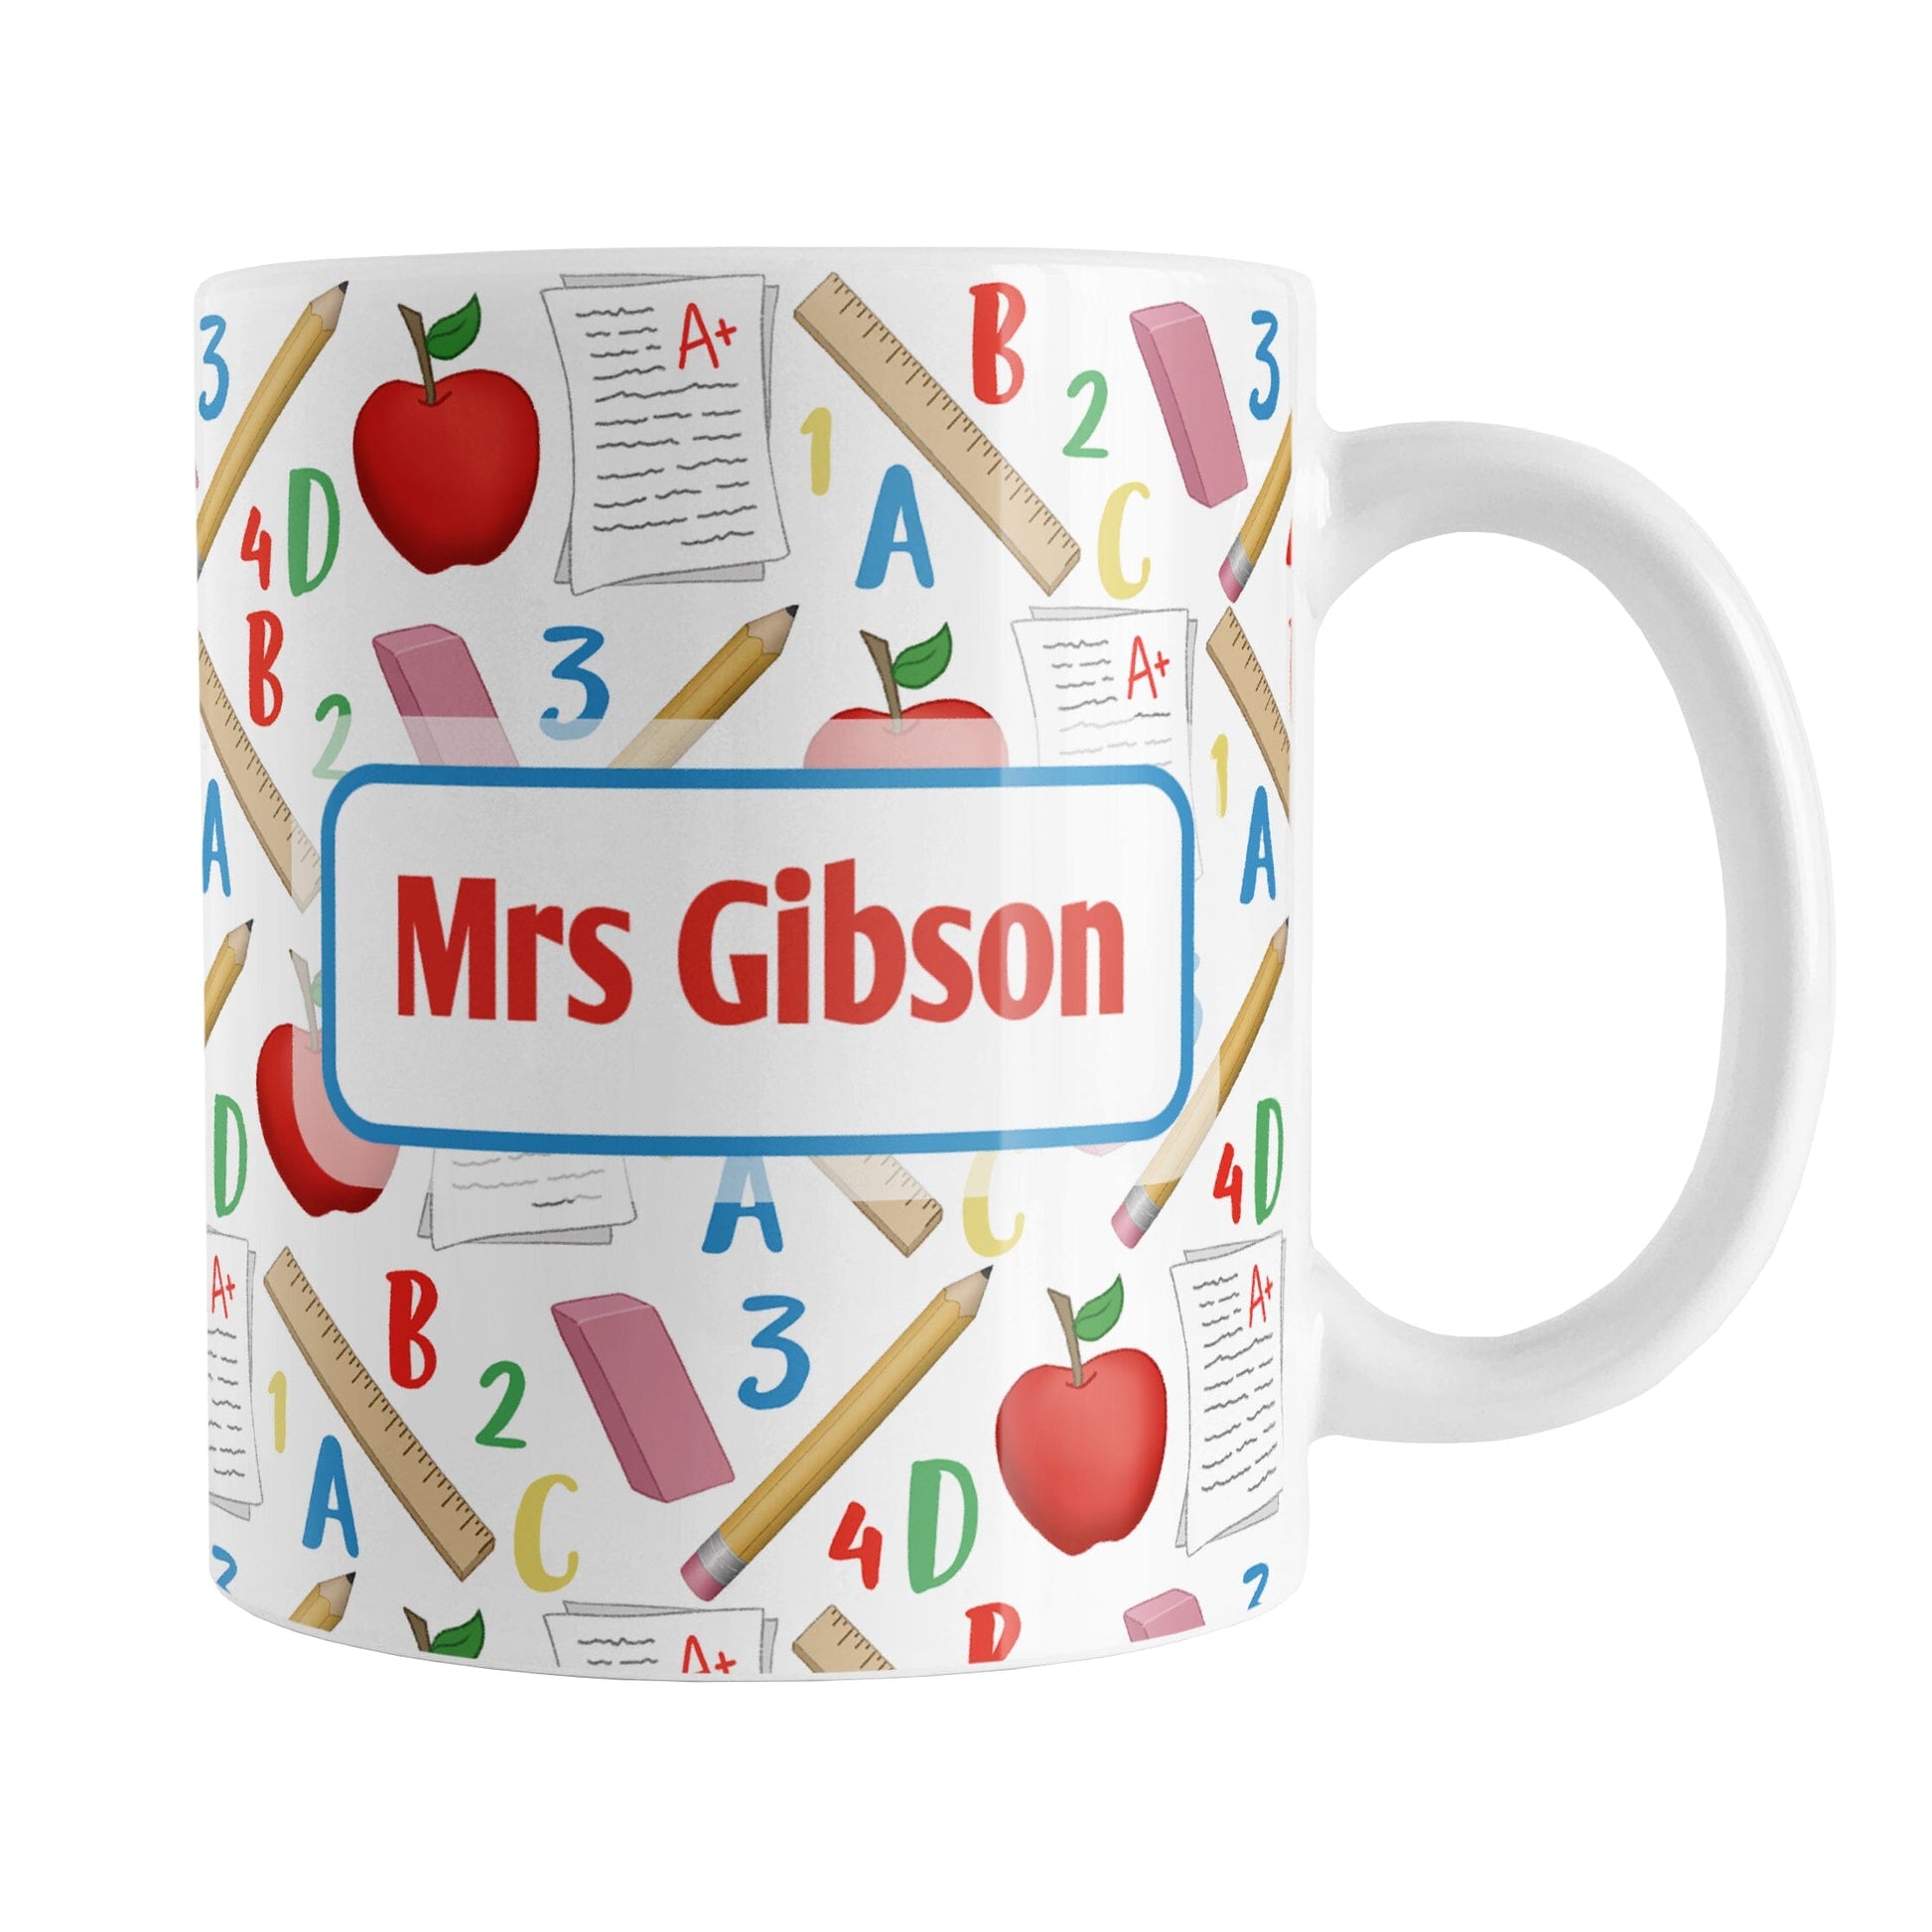 Personalized School Pattern Mug (11oz) at Amy's Coffee Mugs. A ceramic coffee mug designed with a school-themed pattern with apples, rulers, erasers, graded papers, numbers, and letters that wraps around the mug to the handle. Your personalized name or your teacher's name is custom printed on both sides of the mug over the school pattern.